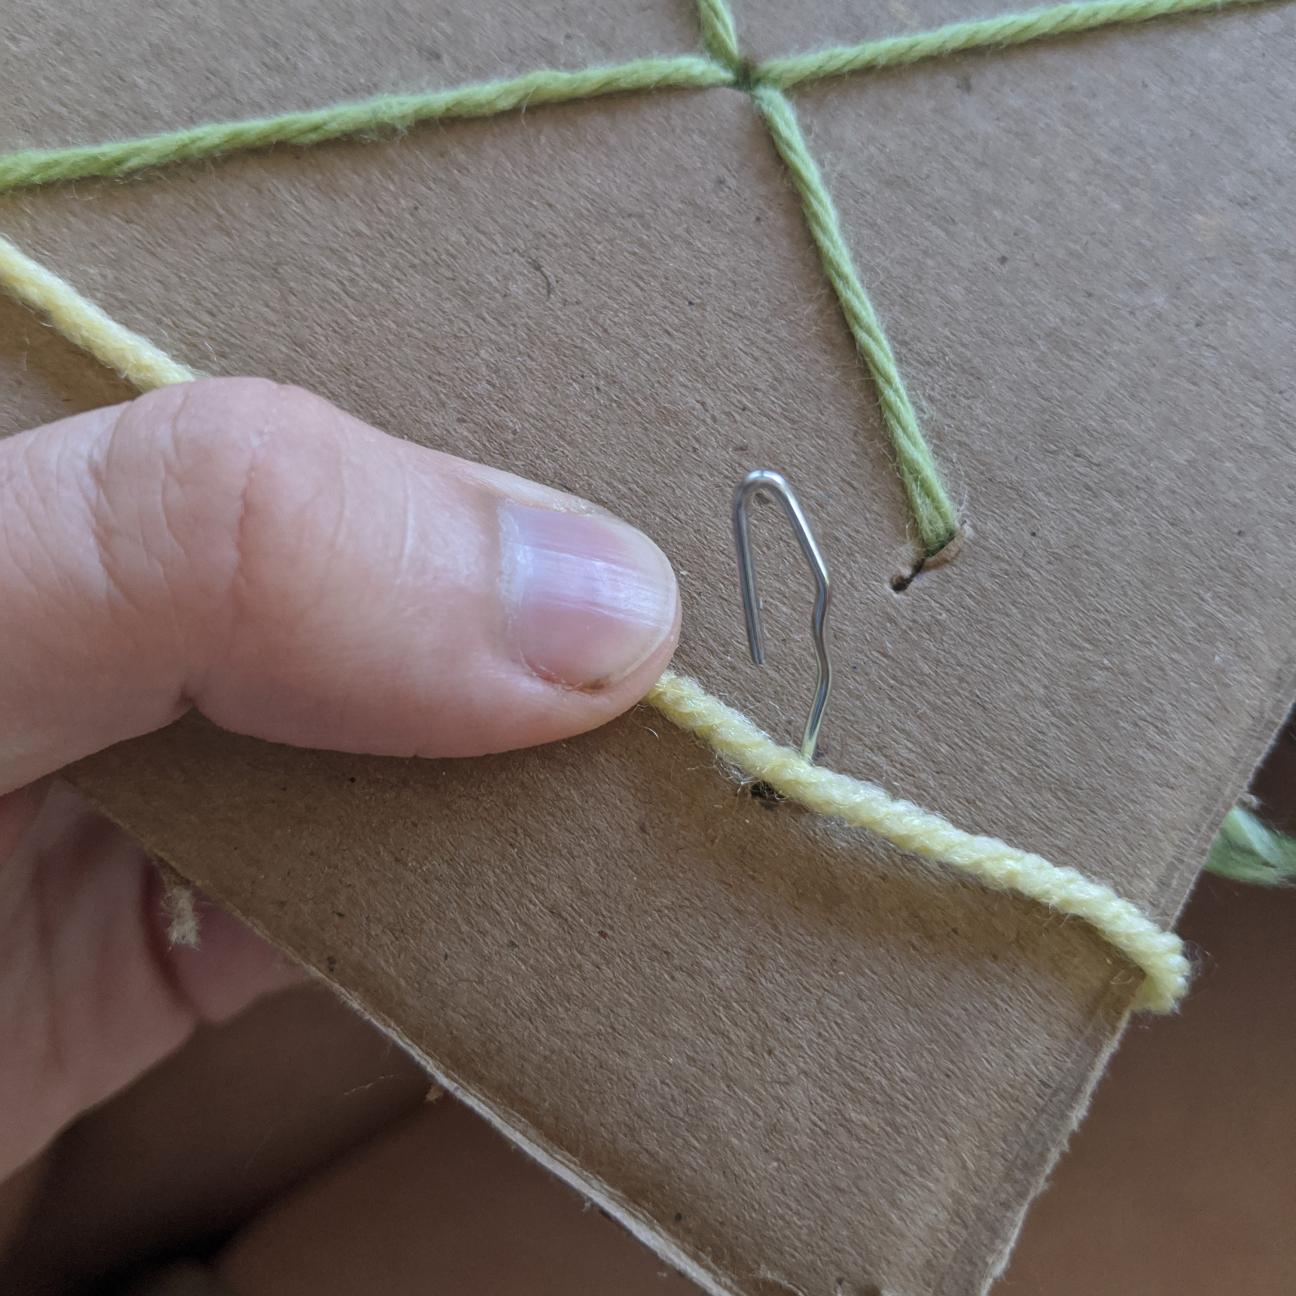 Paperclip hook sticking out of the cardboard, near a strand of yarn.